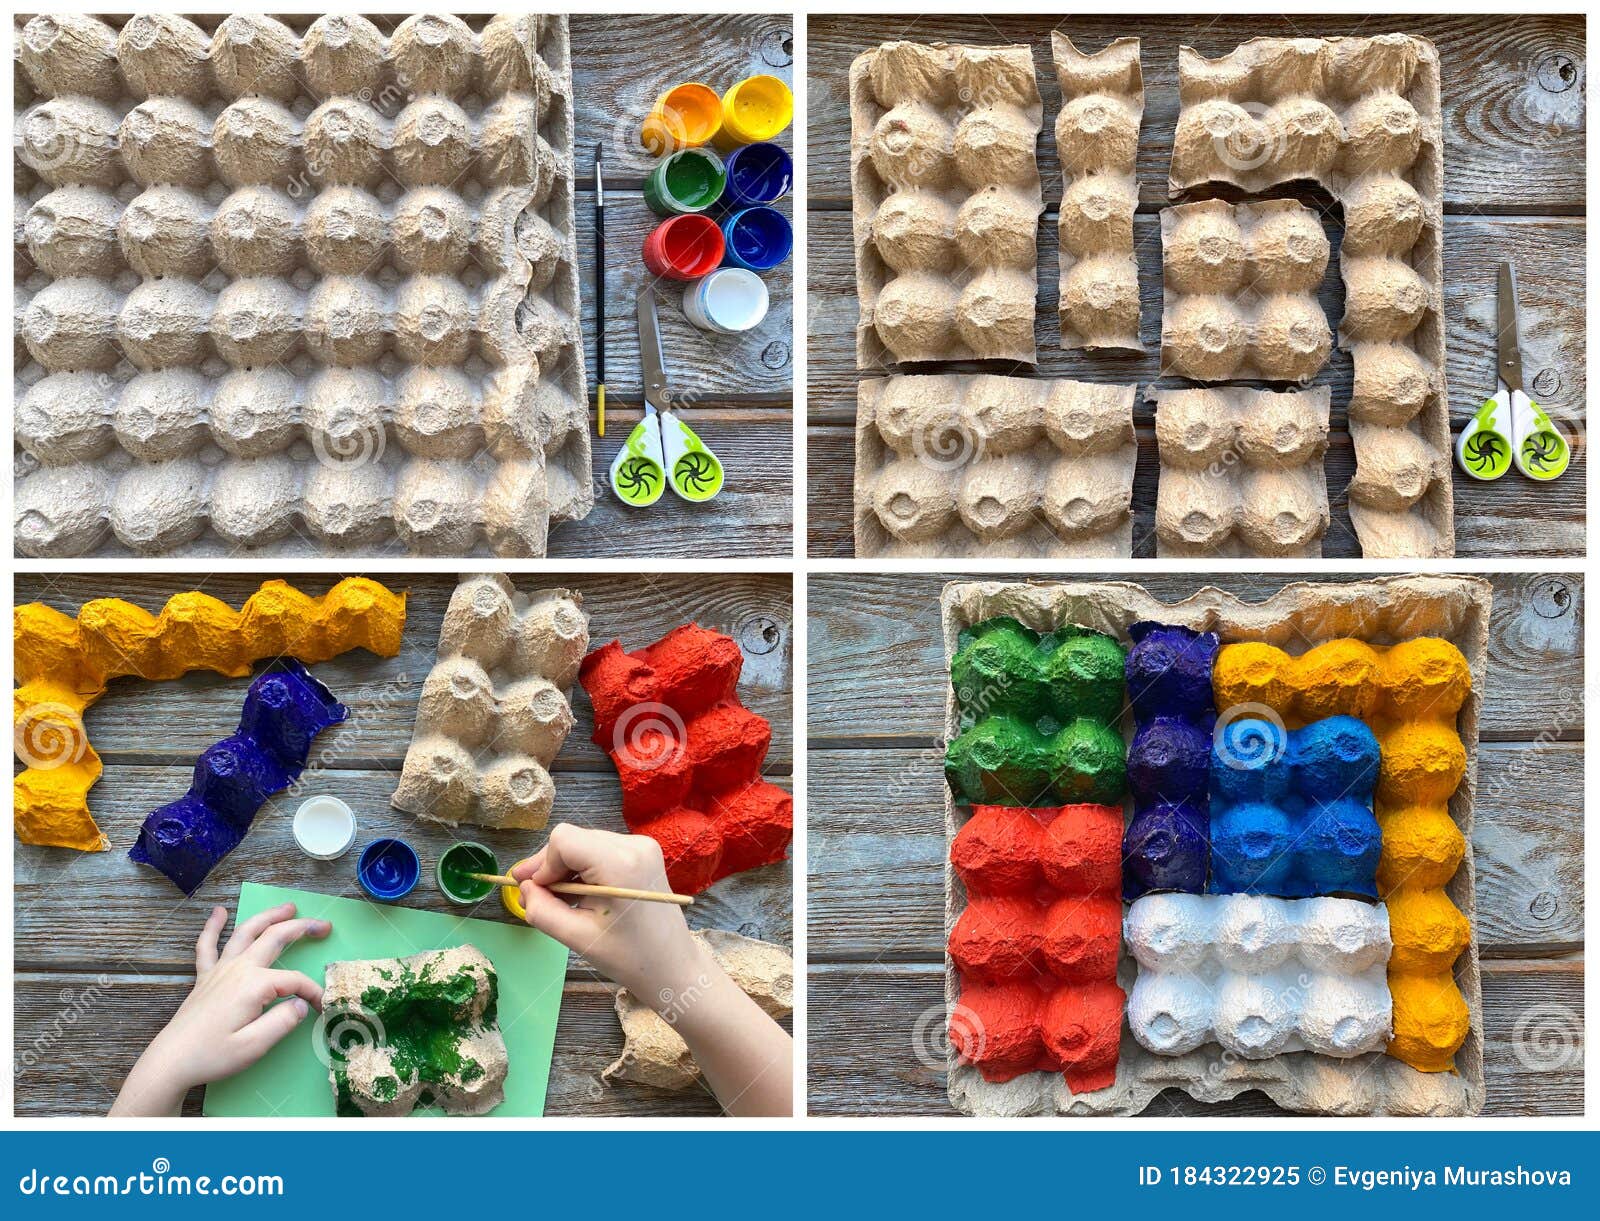 collage-photos-how-to-make-puzzles-children-egg-box-s-game-recycling-eggs-184322925.jpg